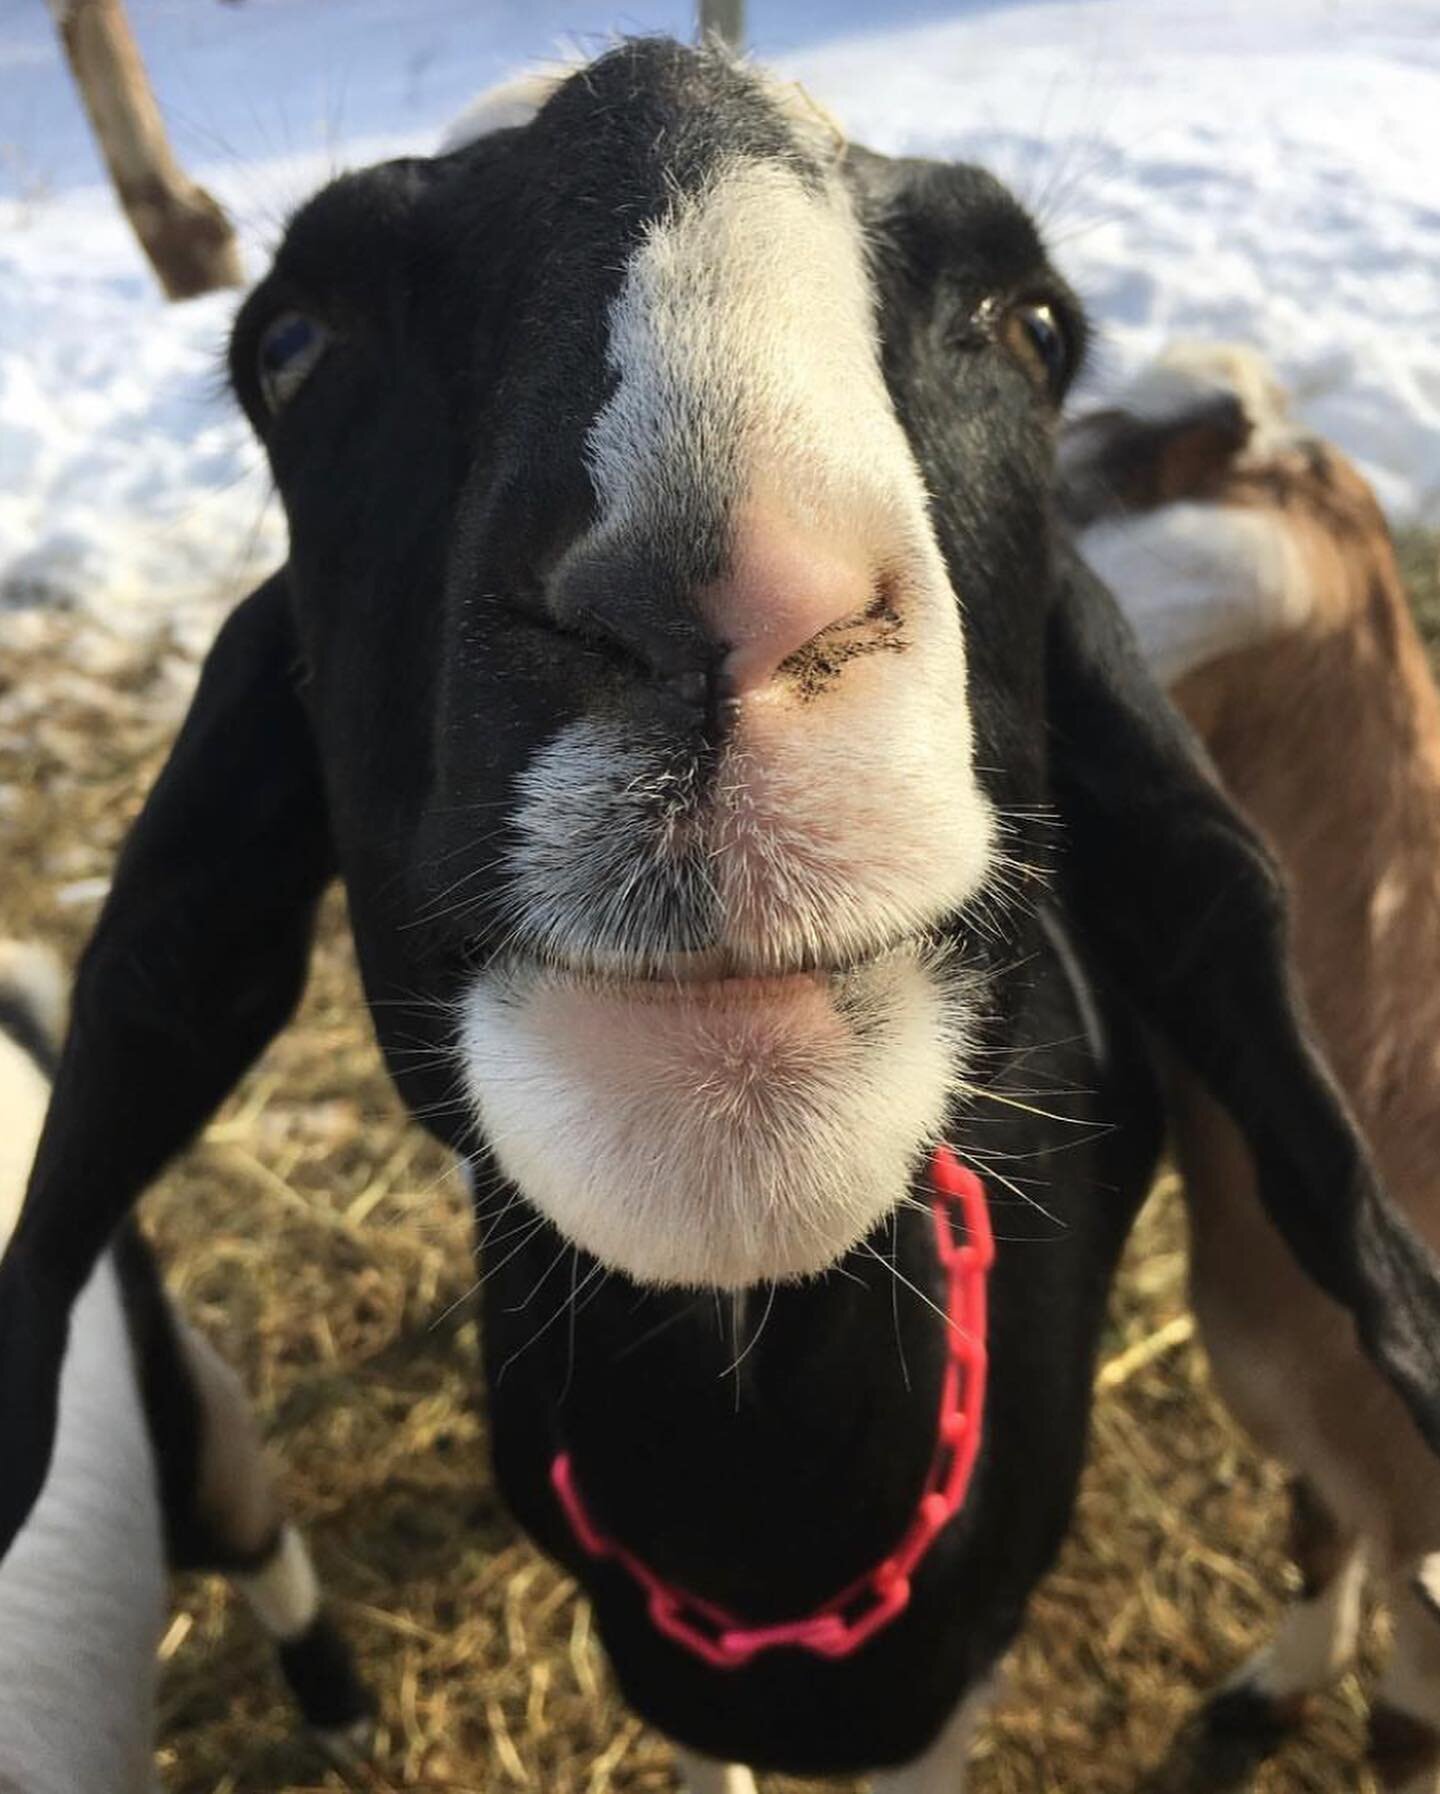 Yesterday we said goodbye to Lightning⚡️, one of our most dear and special goats. She was suffering from kidney failure, likely by caused cancer. She was ten years old. We bought Lightning shortly after arriving to Maine, and almost didn&rsquo;t buy 